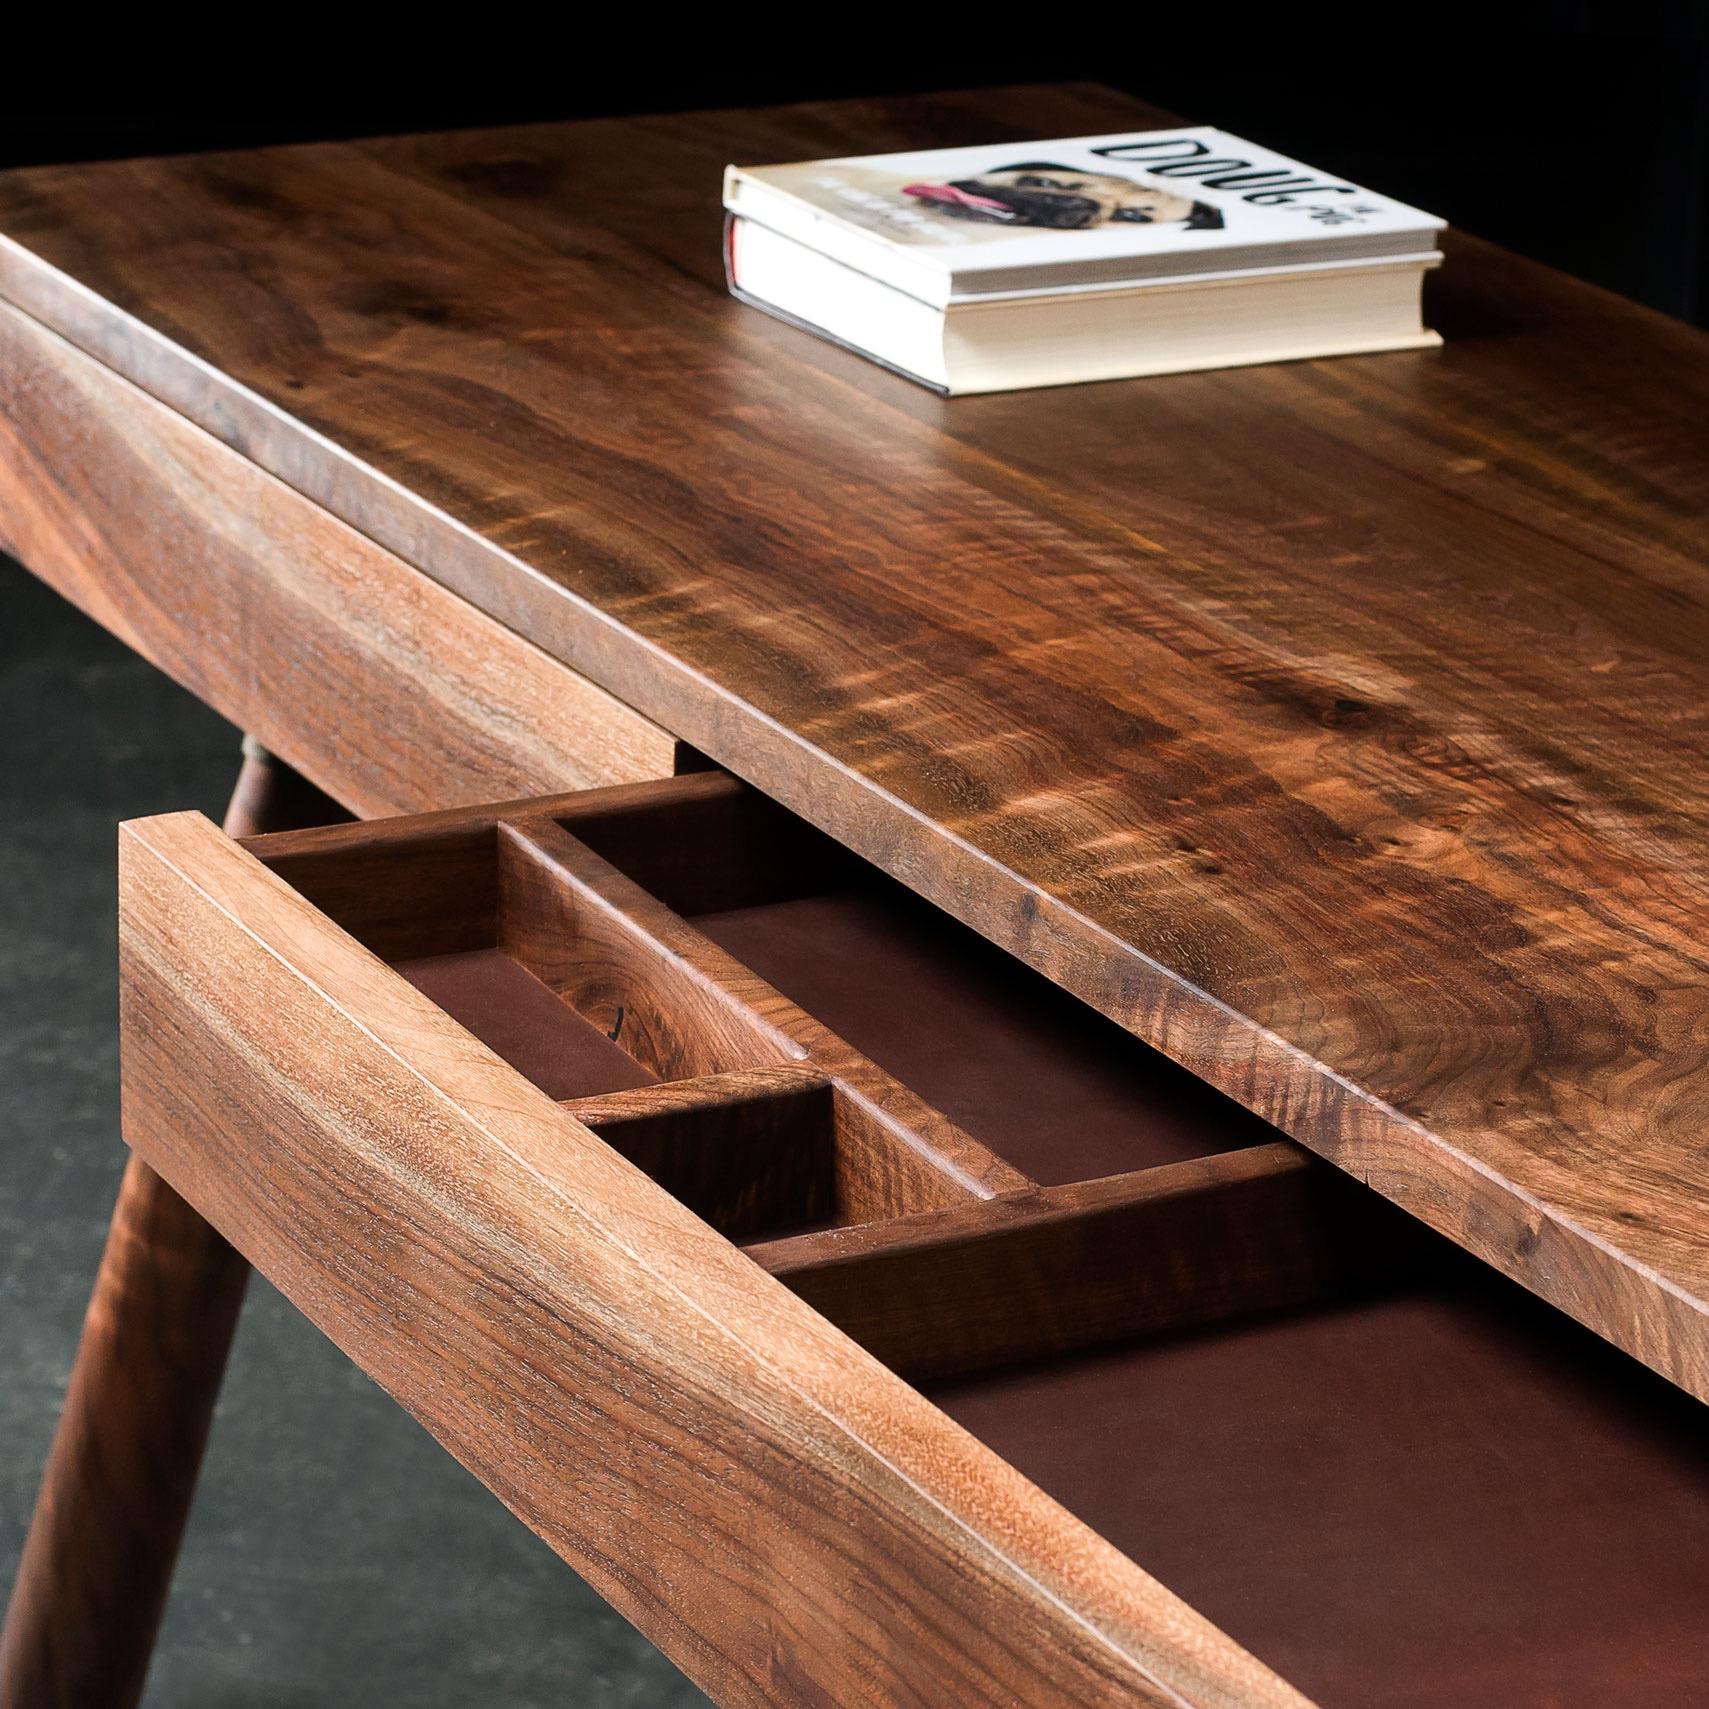 Our FIJN desk is handcrafted in solid wood. Both desks pictured were built in figured Oregon black walnut. Solid wood drawers are lined in leather and inserts can be customized to suit.

Hand-turned legs attach to the desk top in steel cuffs.